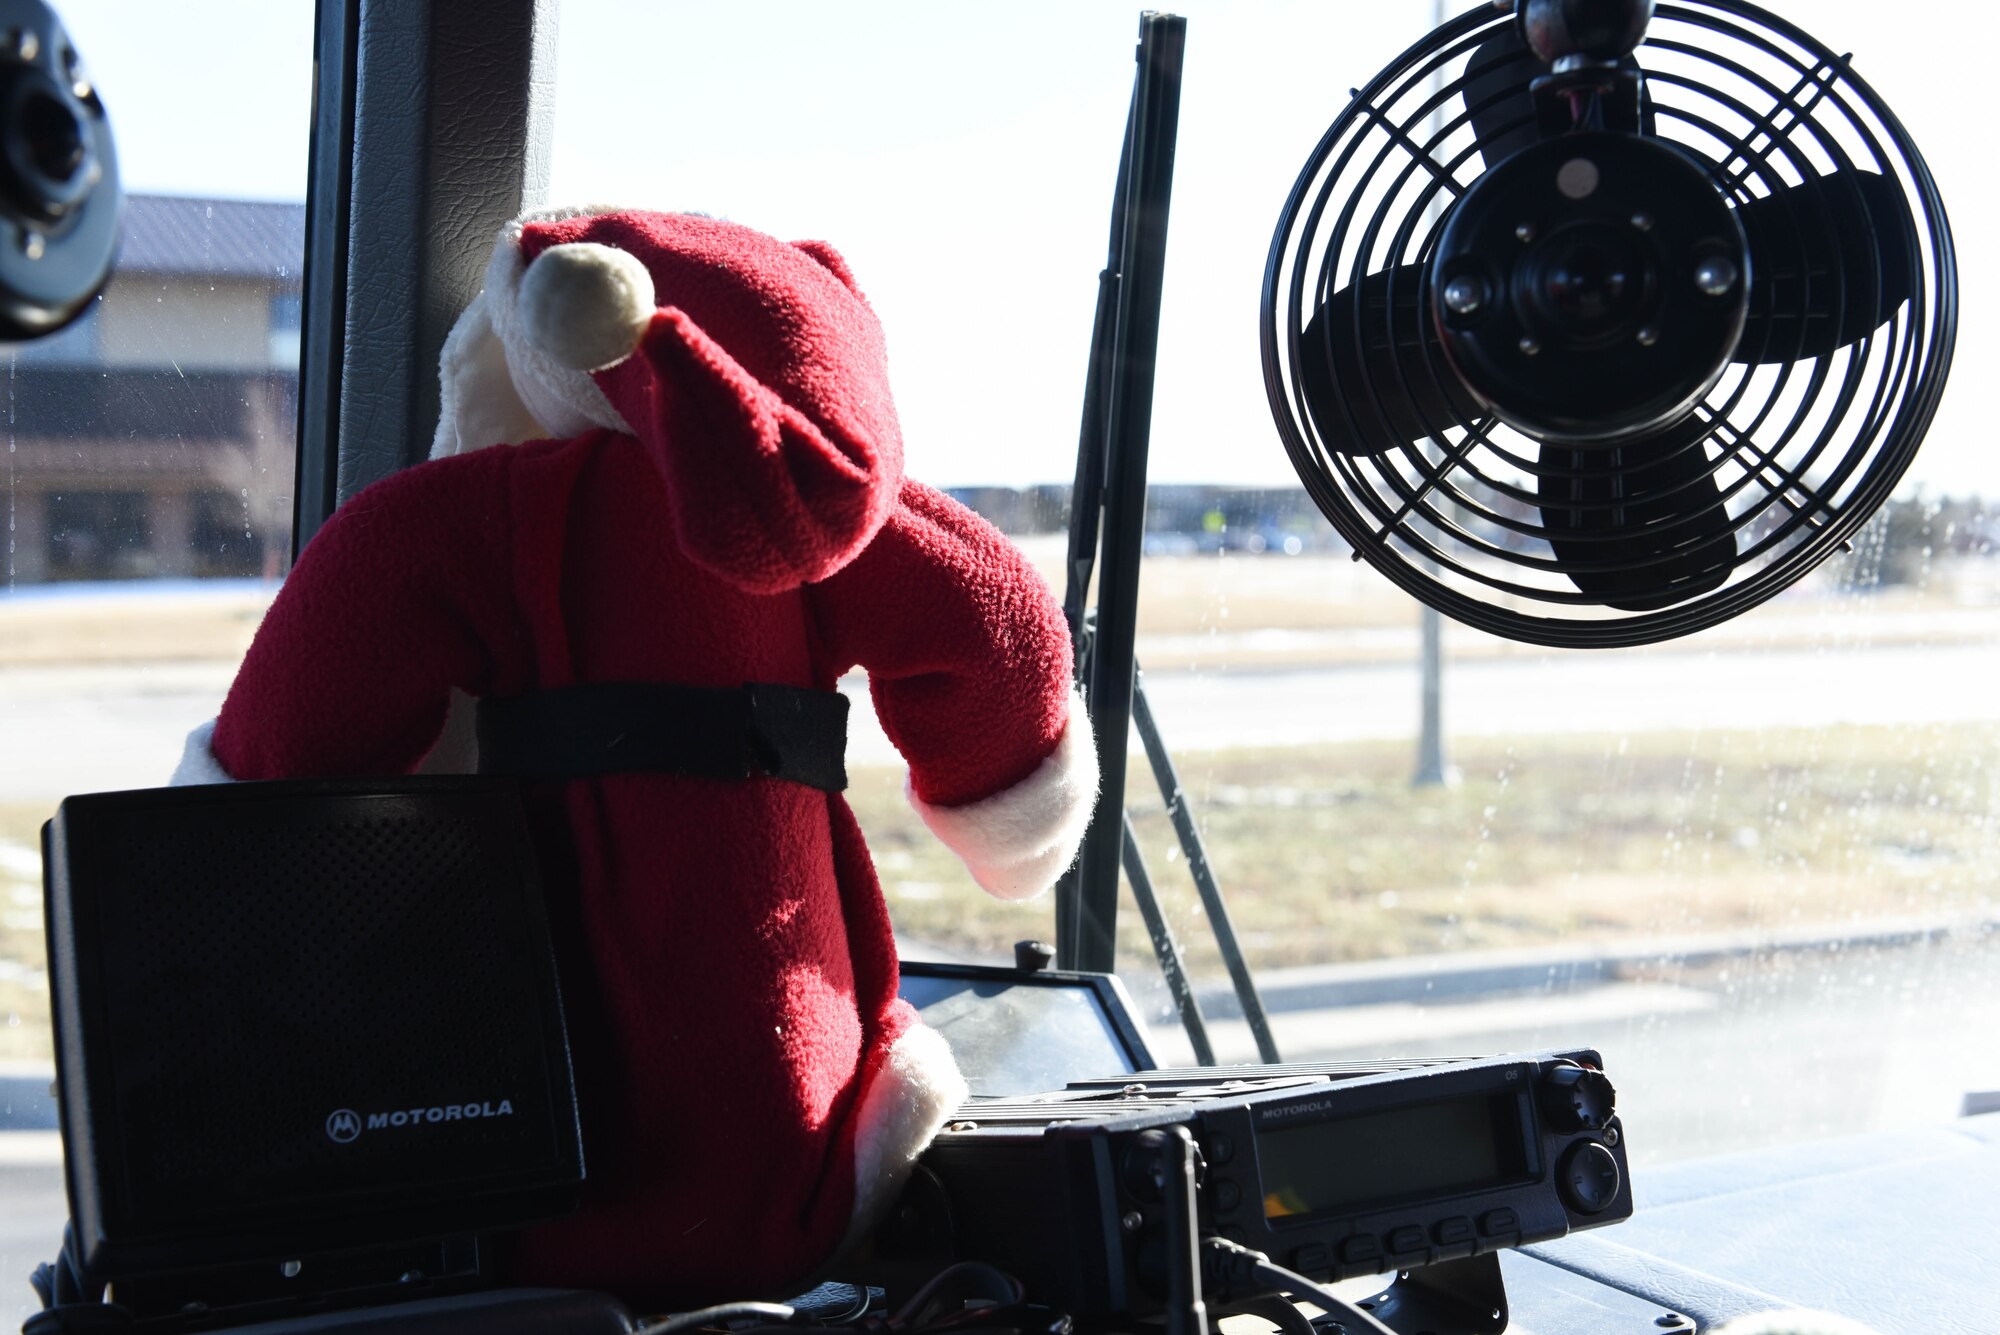 A Santa Claus doll sits in the front window of a fire truck on Ellsworth Air Force Base, S.D., Dec. 13, 2018. Following a “Santa and Me Story Time” event at the Holbrook Library, Airmen and their families were invited to the parking lot to tour a fire truck and visit with firefighters from the 28th Civil Engineer Squadron Fire Department. (U.S. Air Force photo by Airman John Ennis)